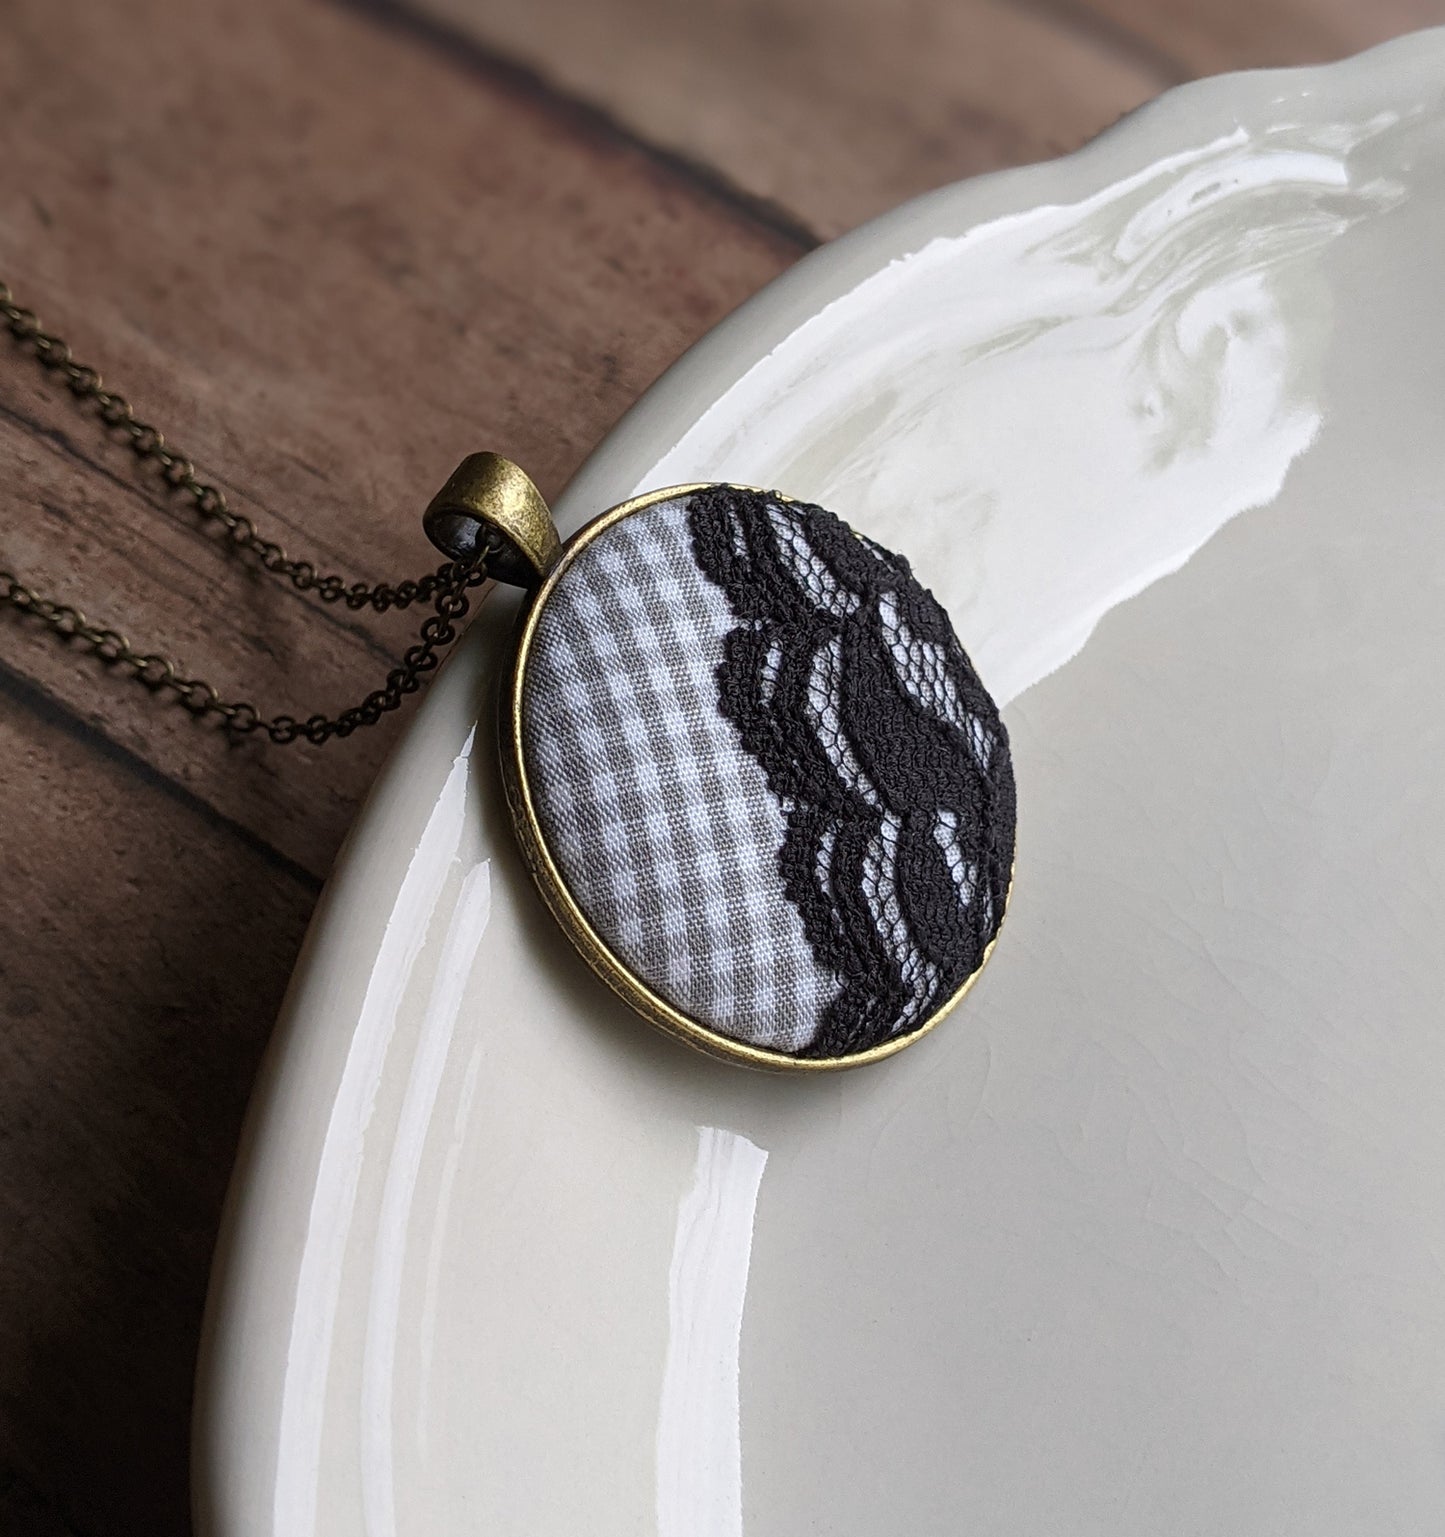 Classic Gingham Plaid Lace Pendant In Black, White, And Gray